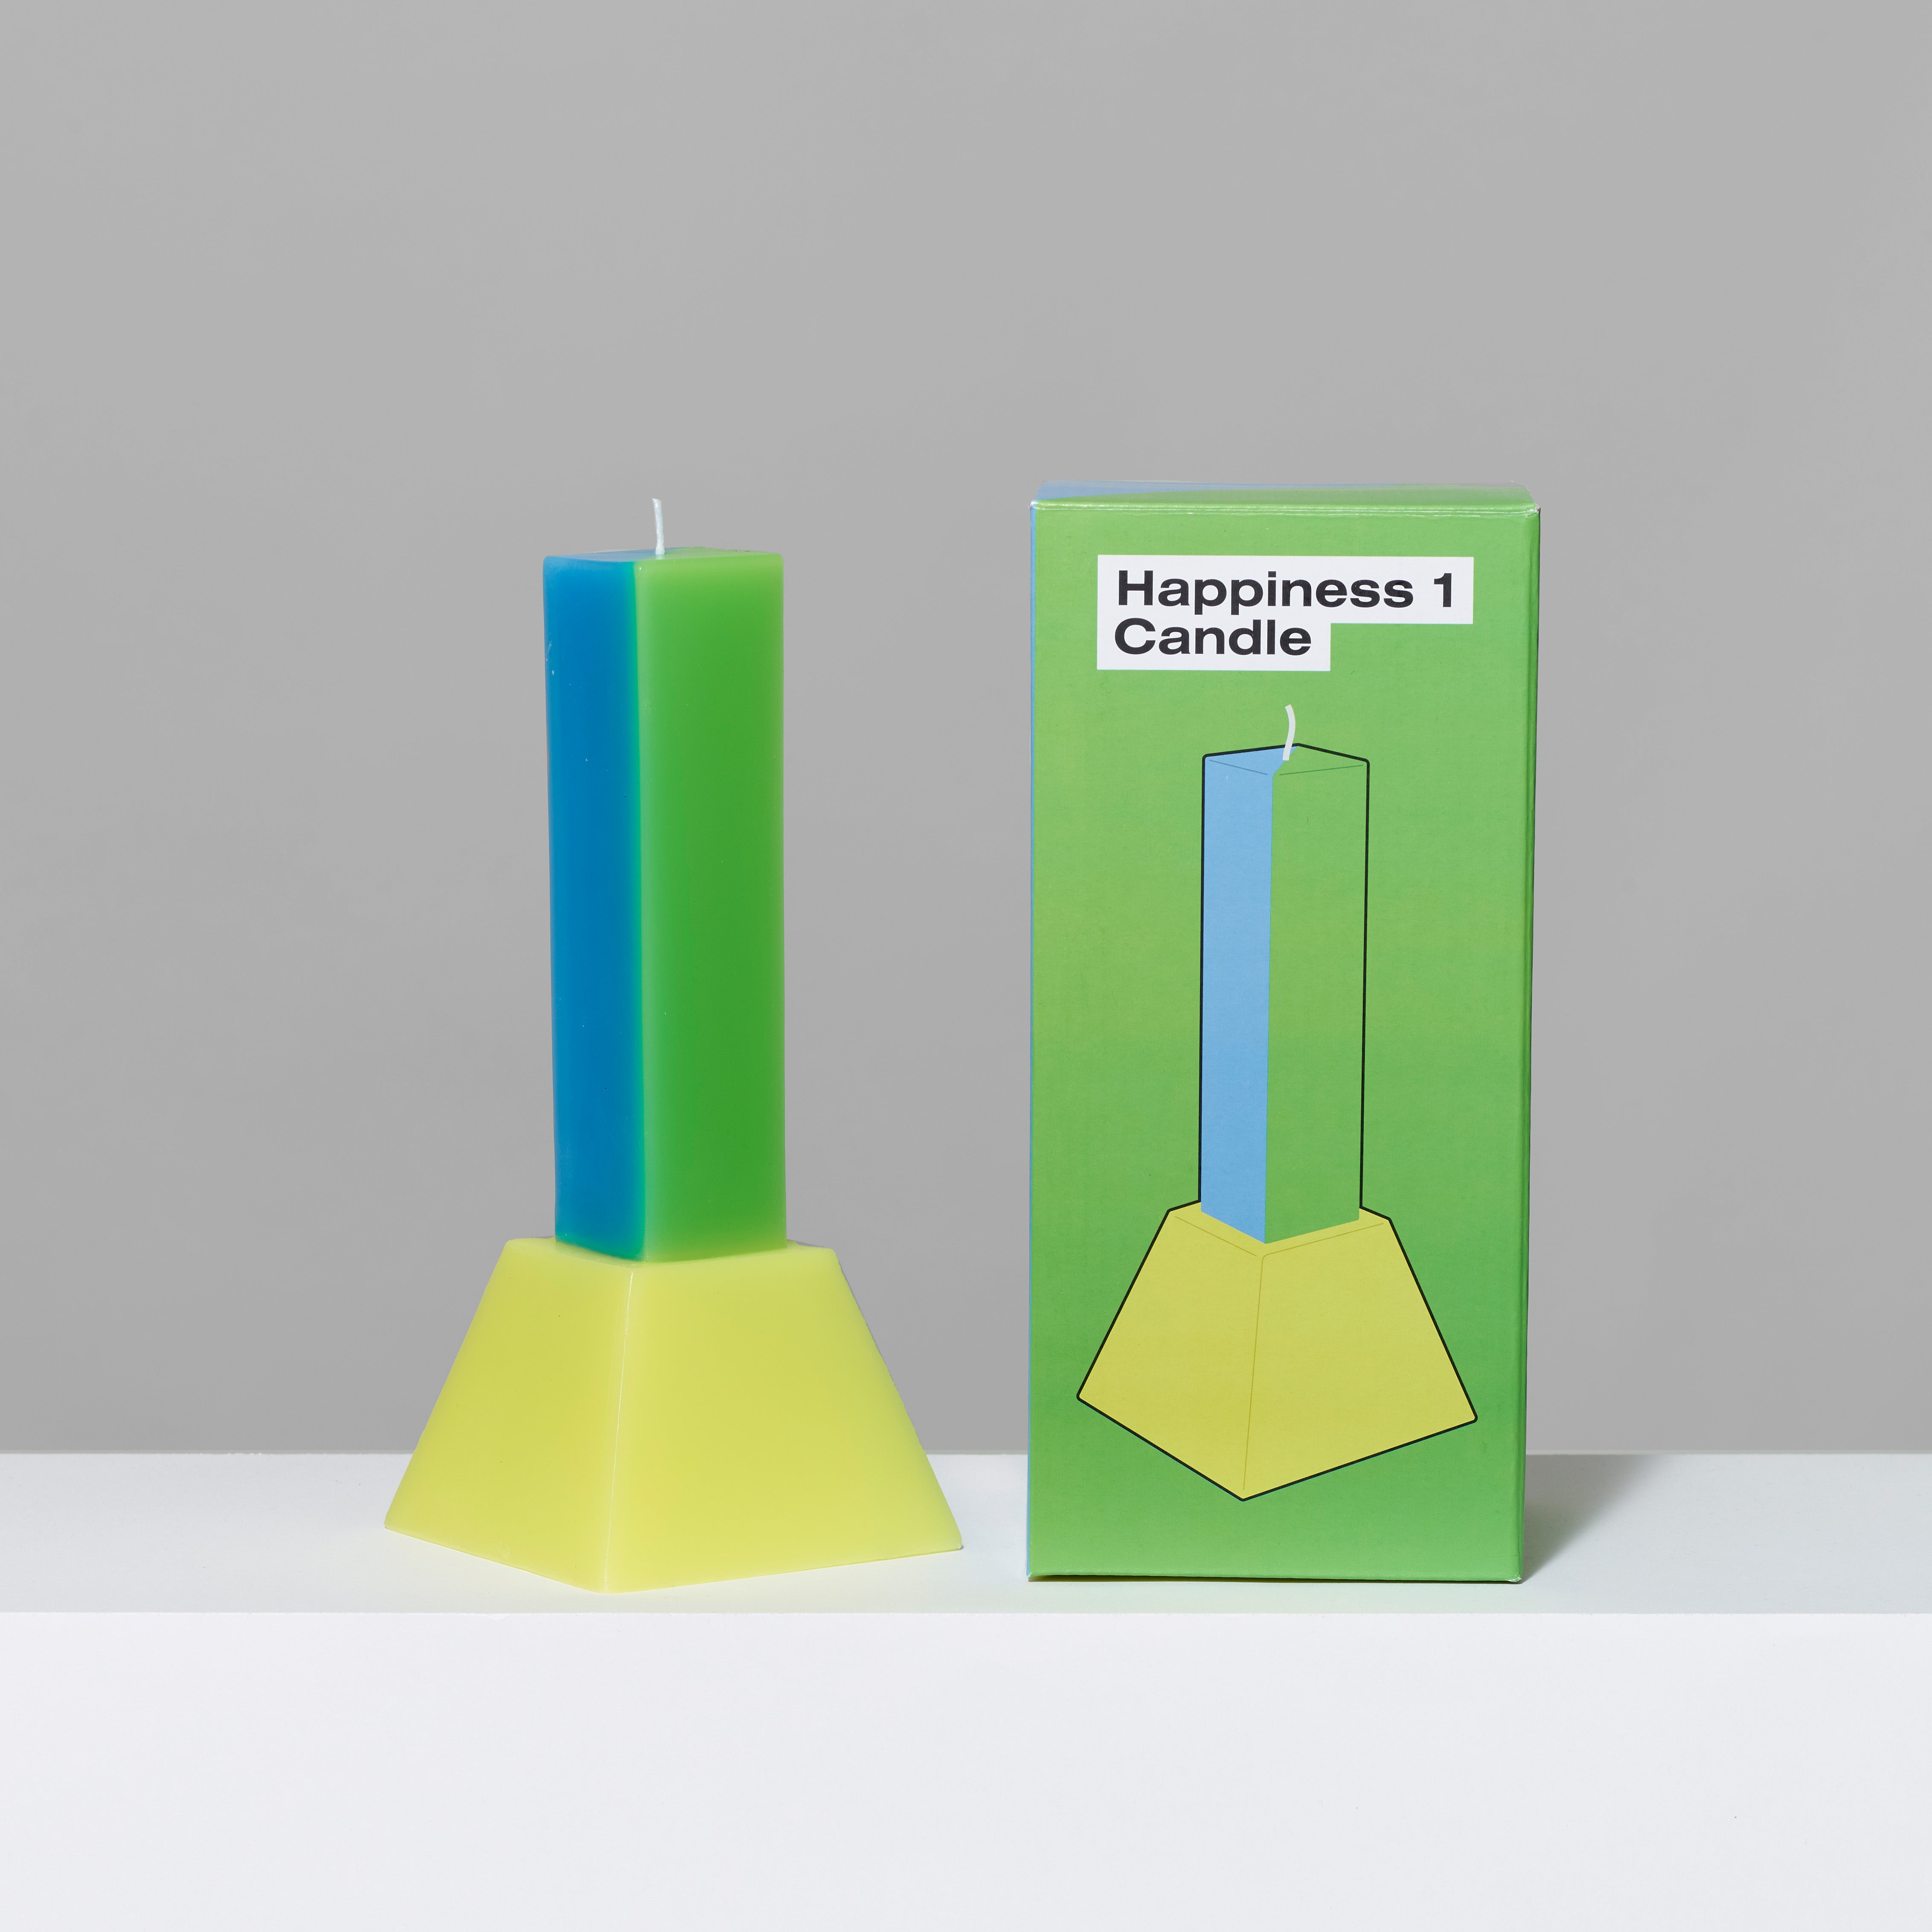 Paraffin wax Blue/Green Happiness Pillar Candle and box. Measures 4" x 4" x 9".